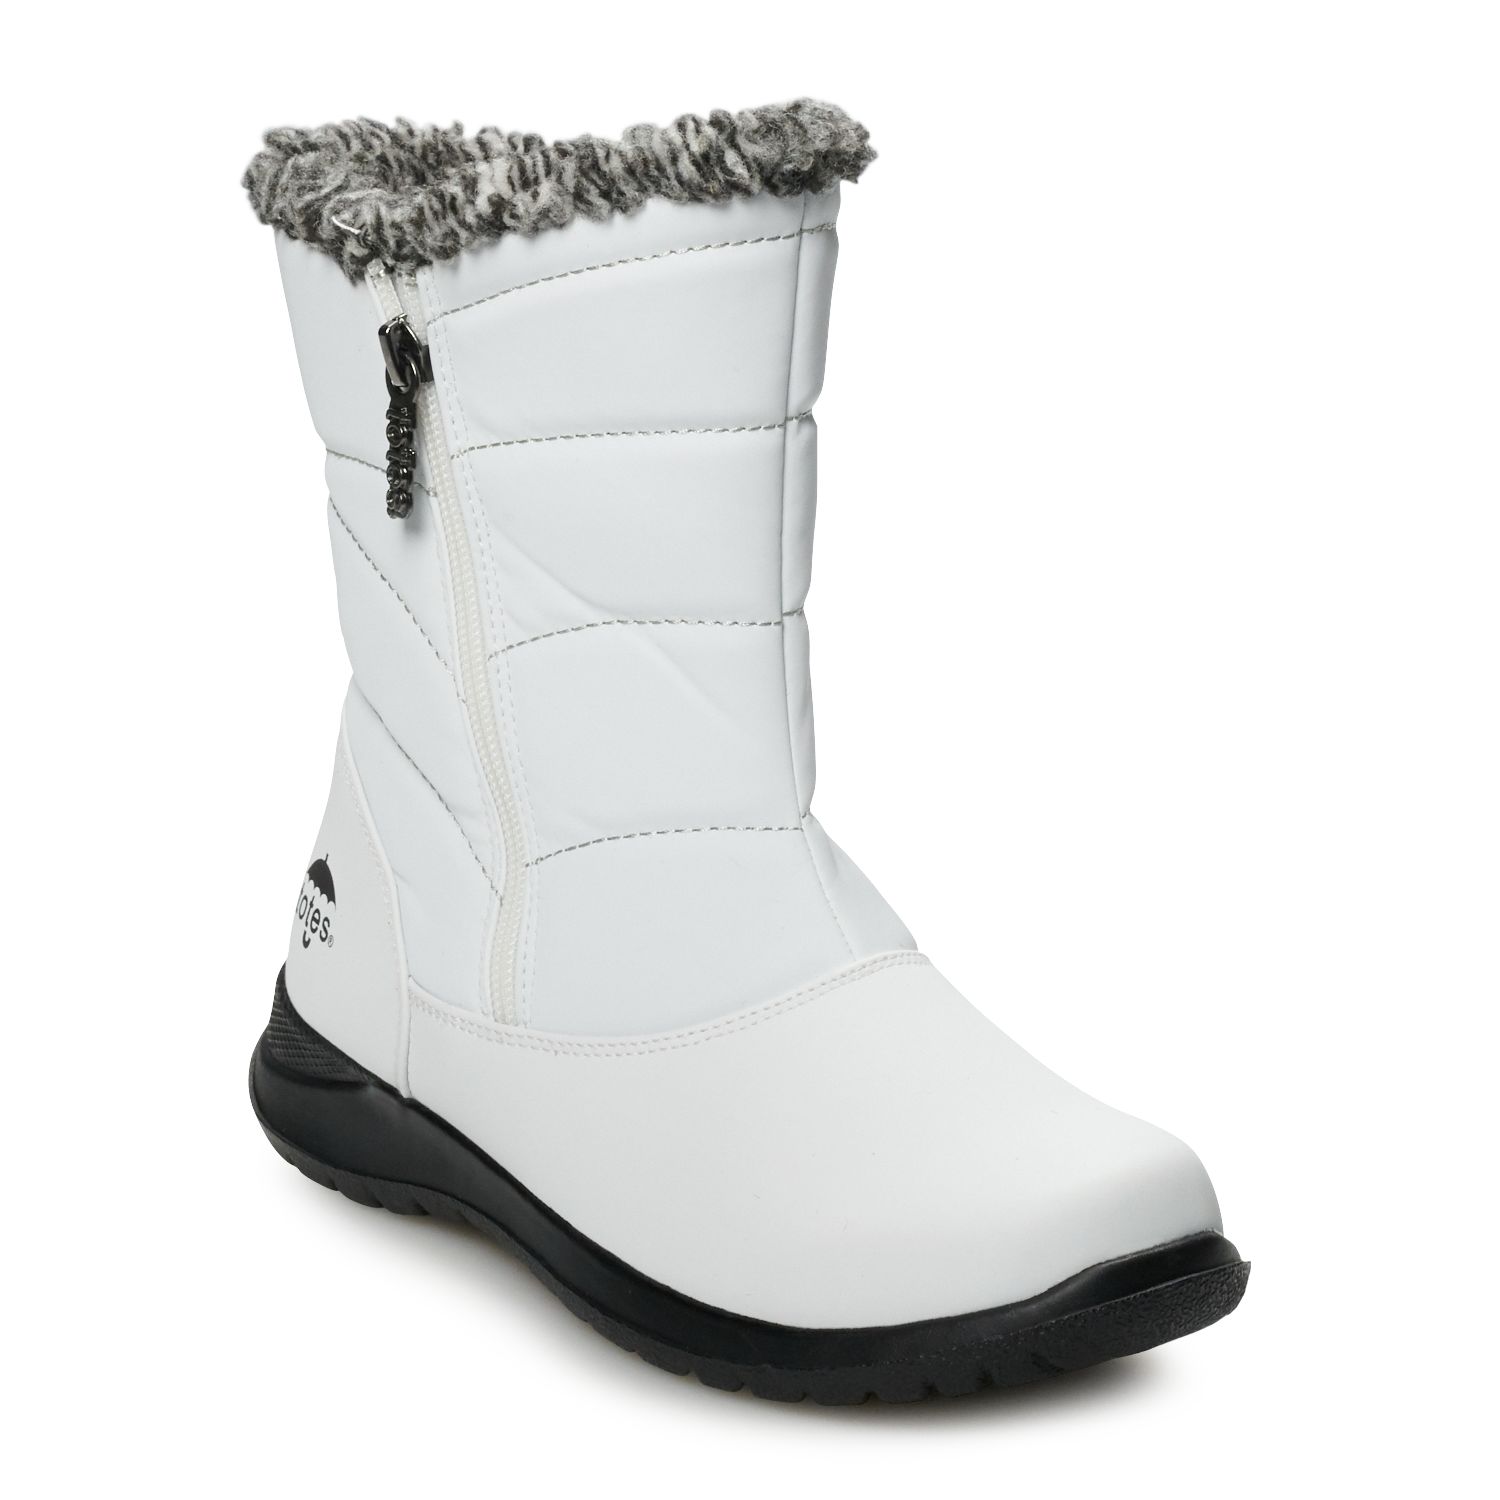 black snow boots for womens waterproof